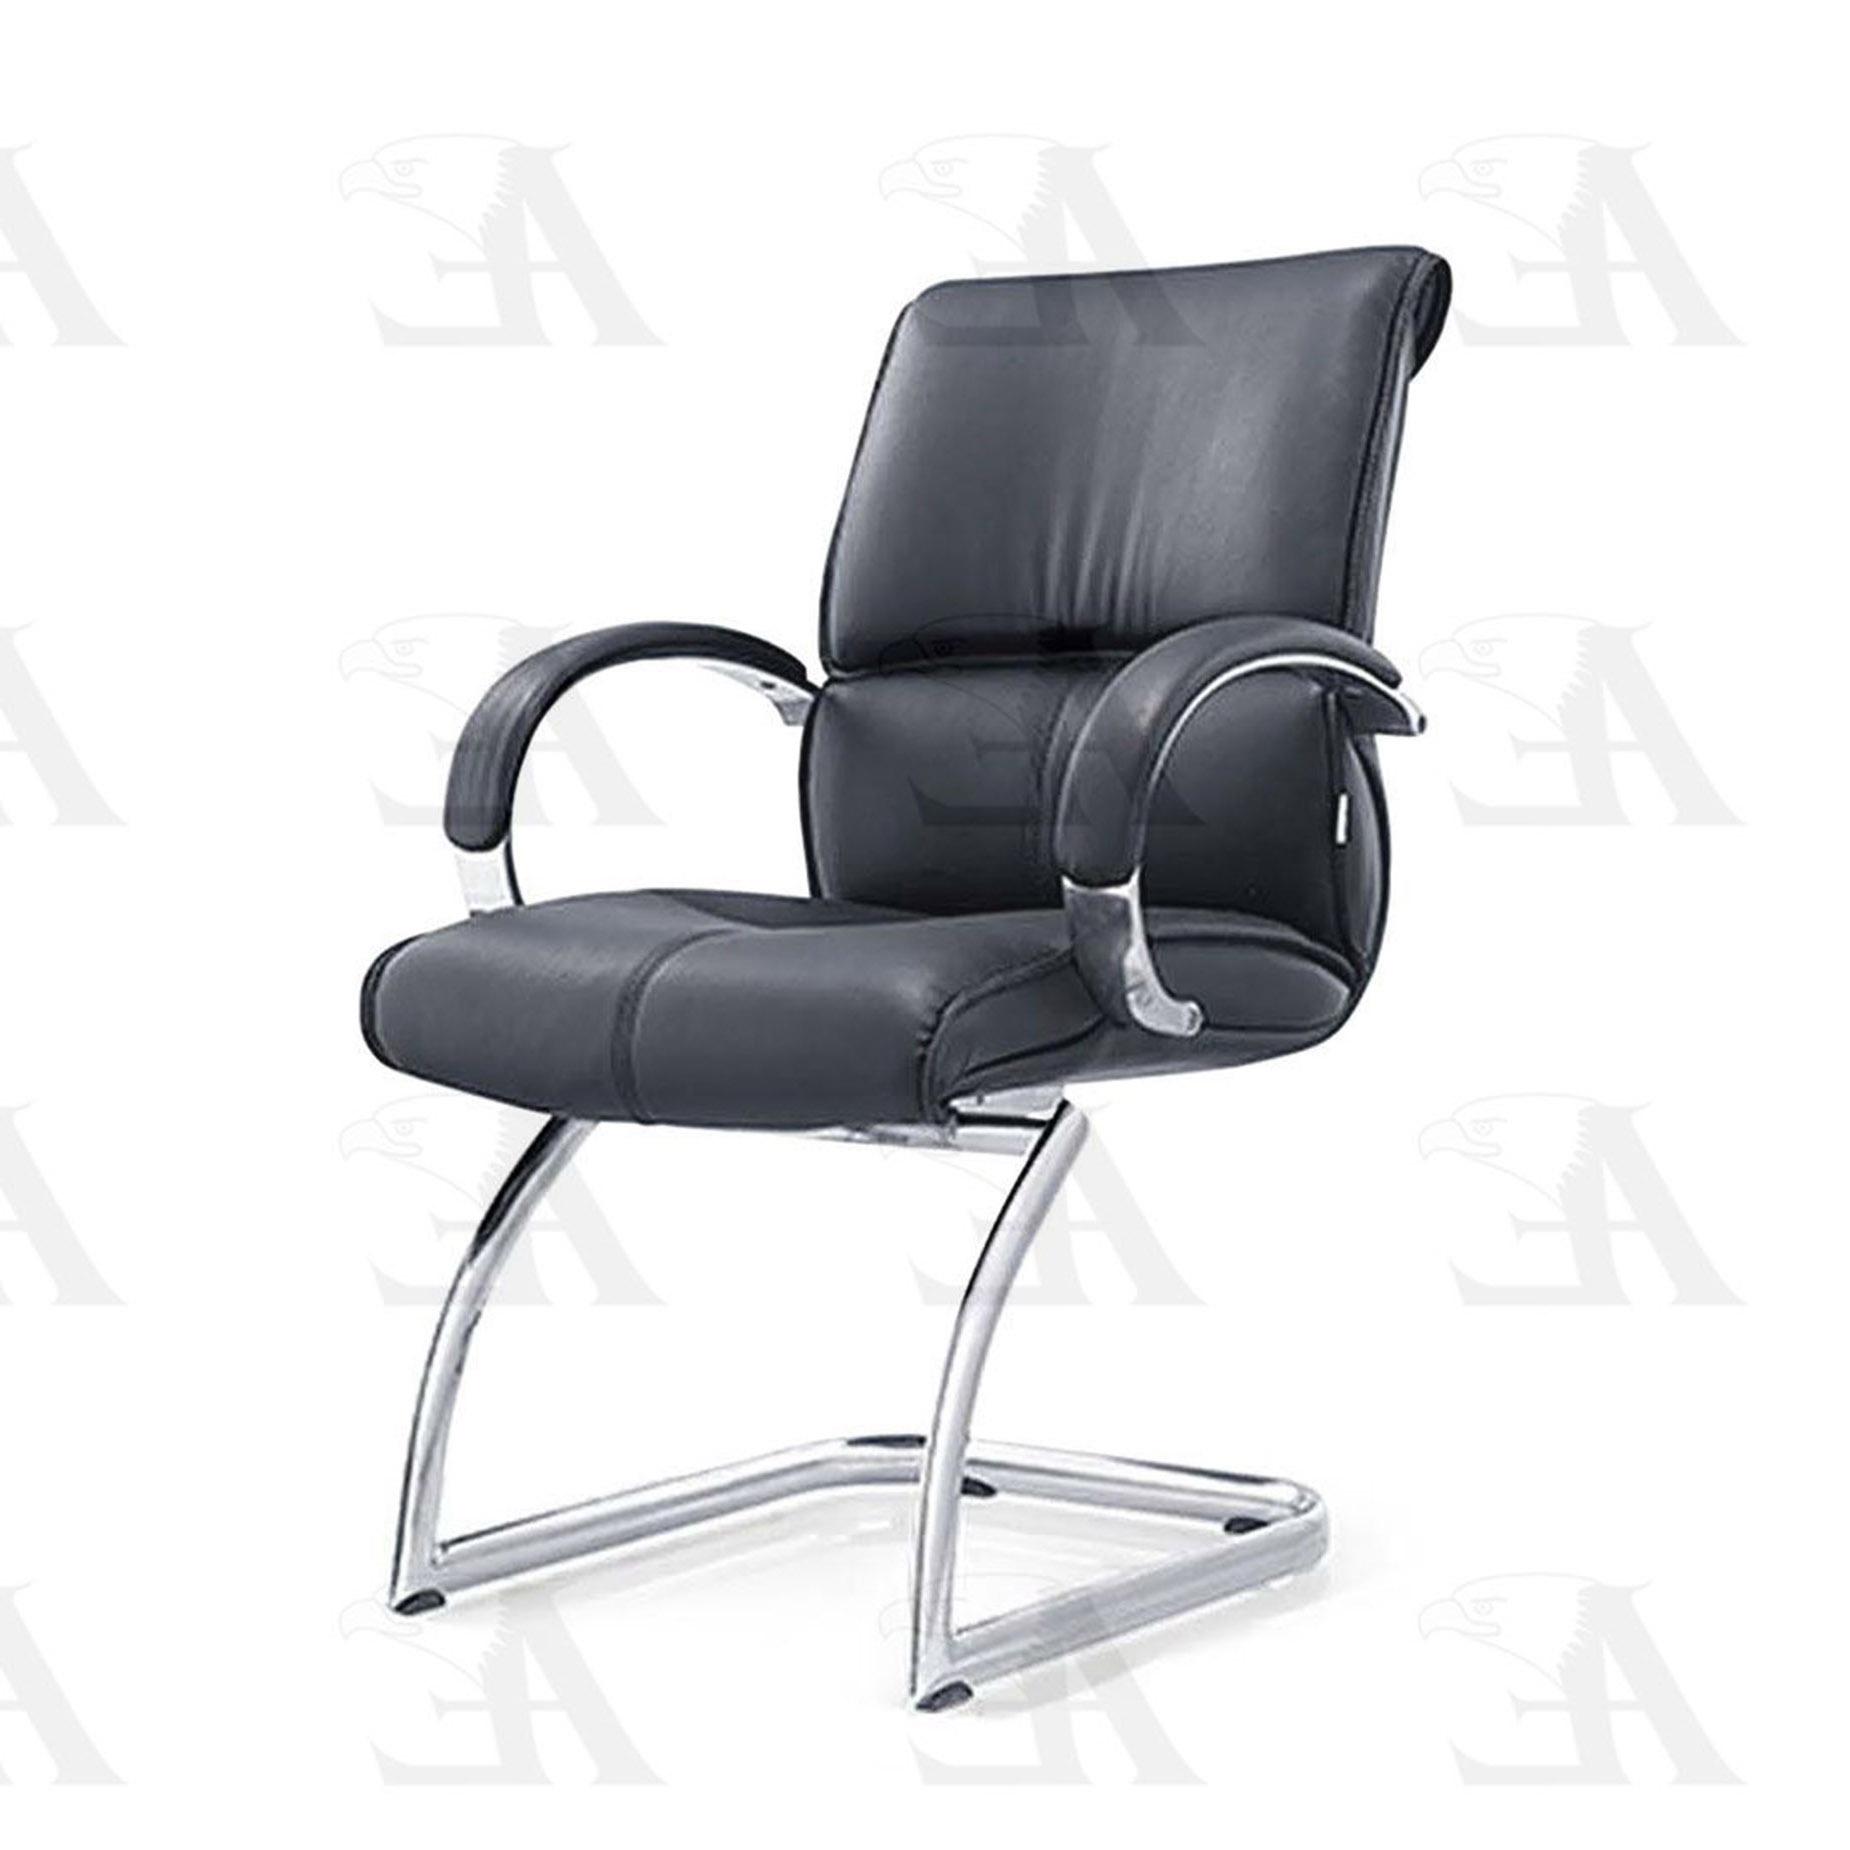 Modern Conference Chair YS883C YS883C in Black 